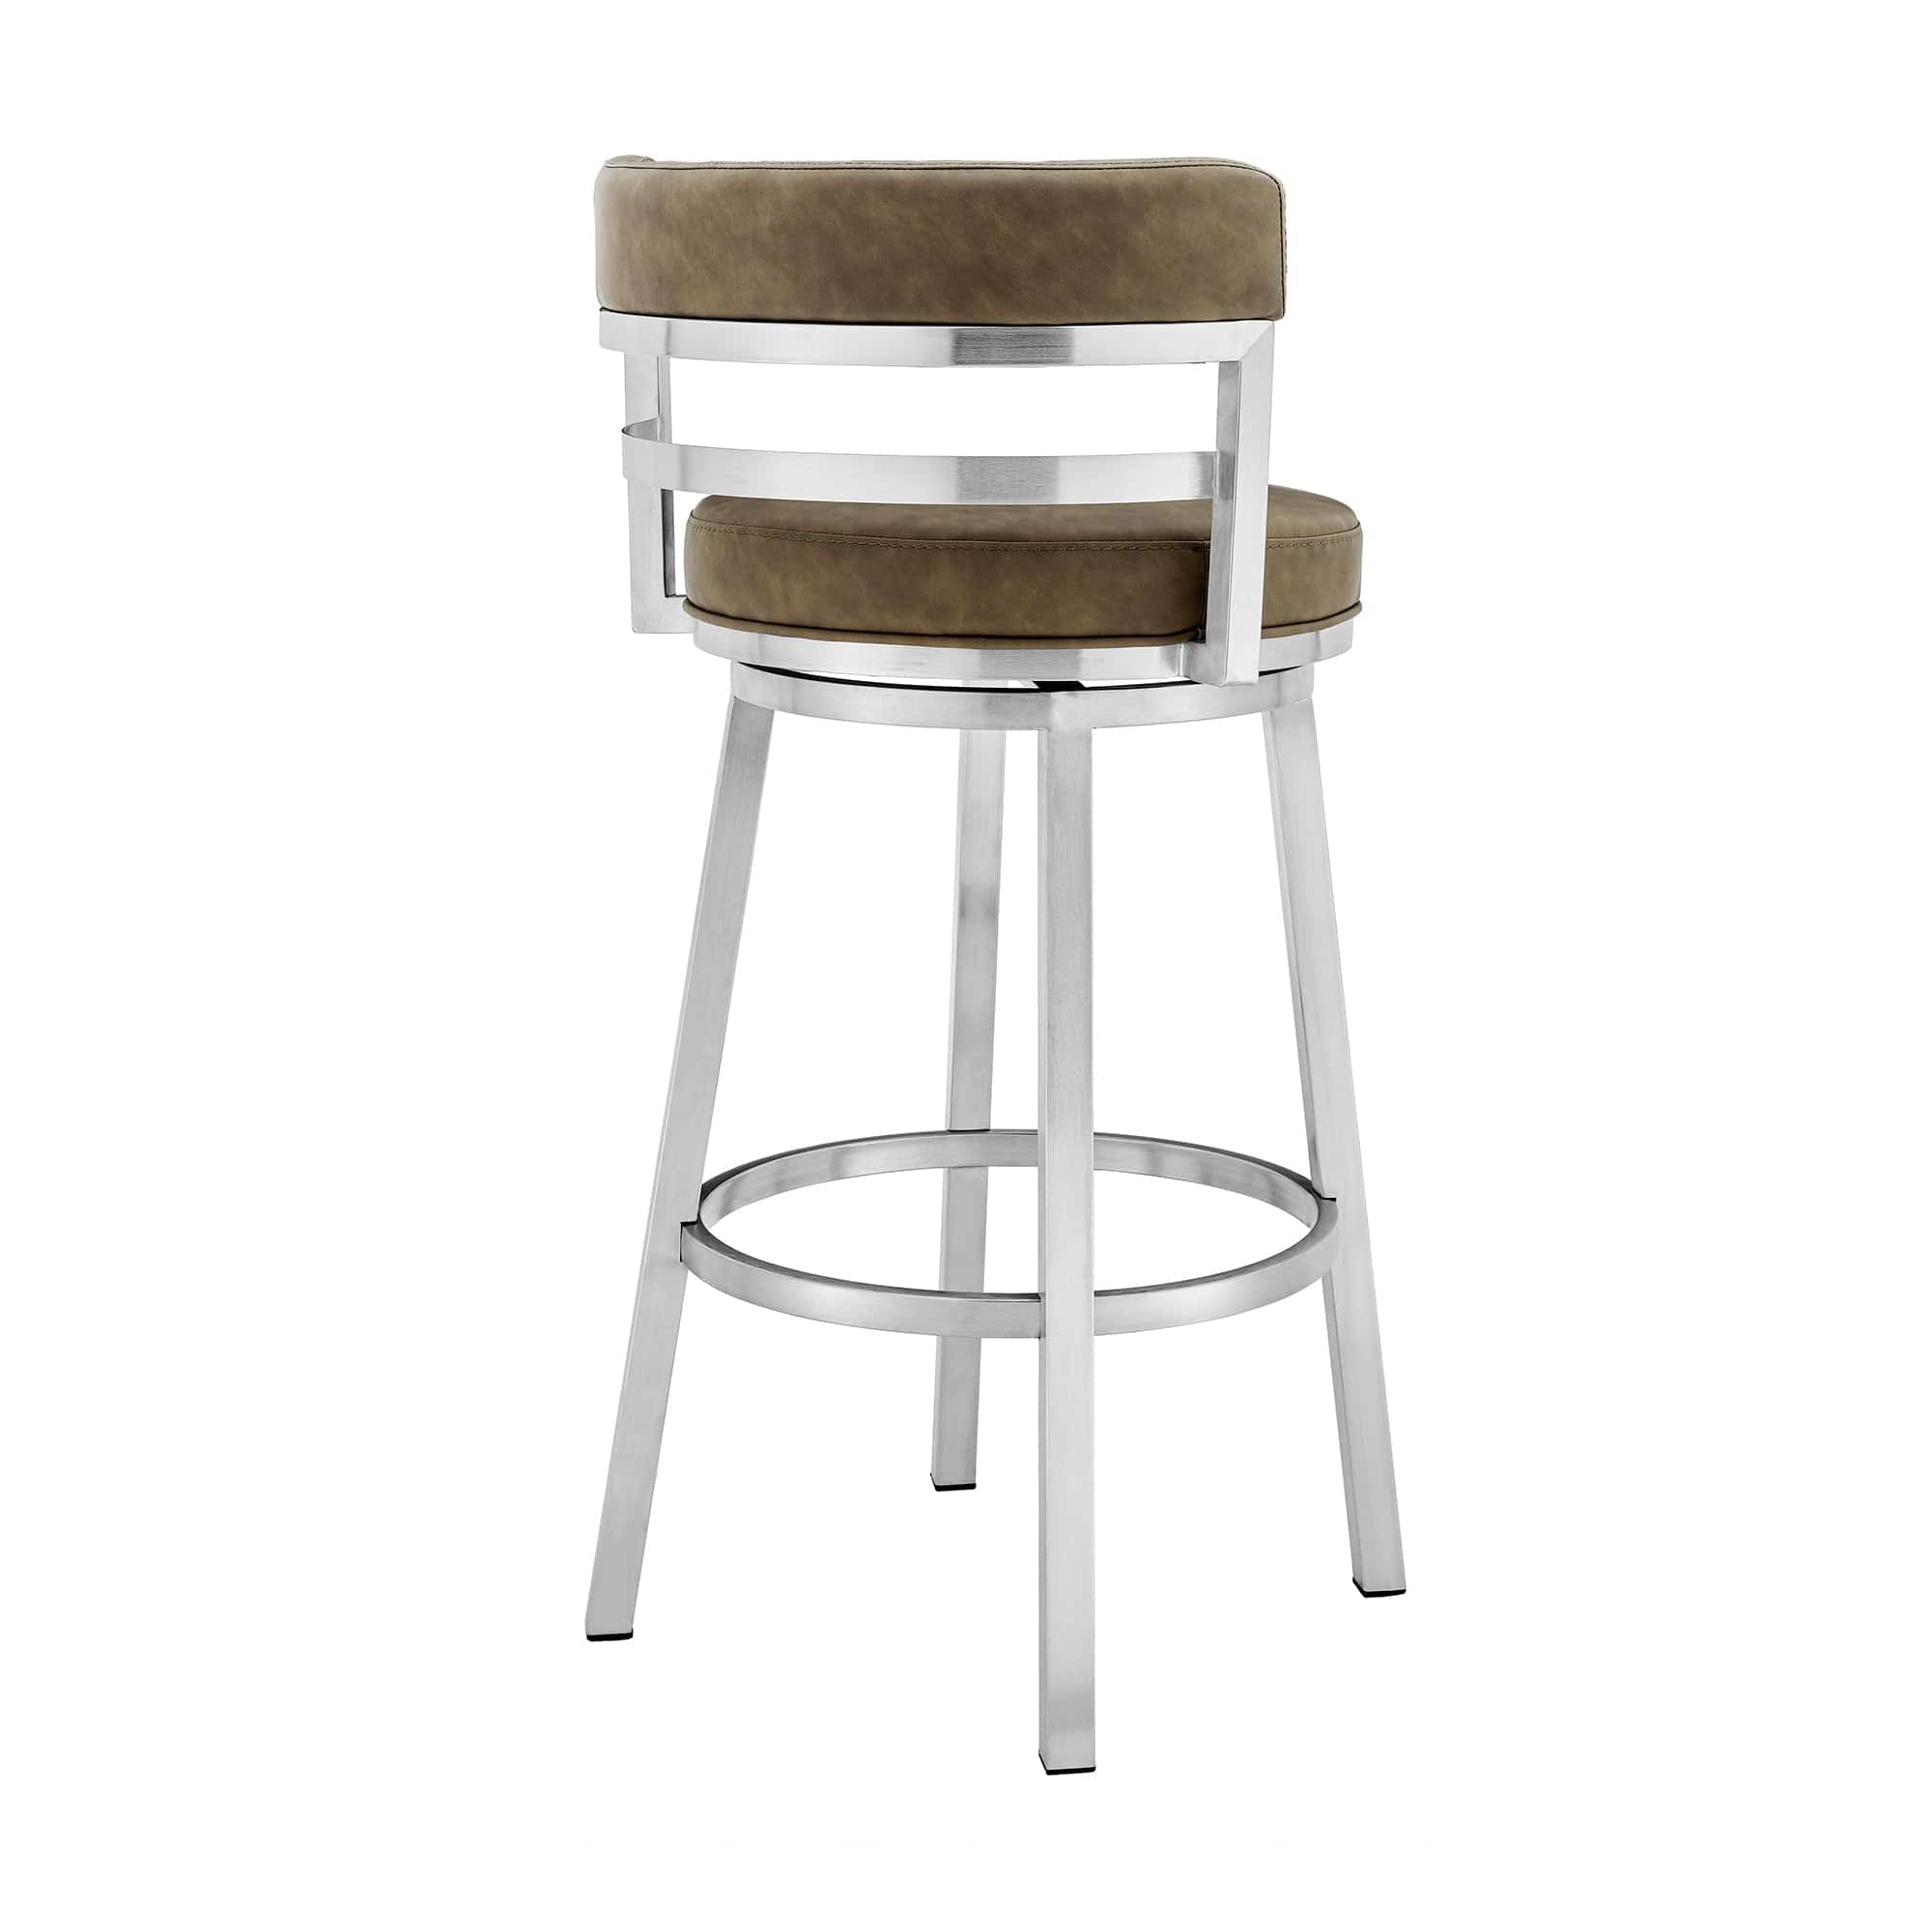 Armen Living Barstool Armen Living | Madrid 26" Counter Height Swivel Green Faux Leather and Brushed Stainless Steel Bar Stool | LCMABABSGRN26